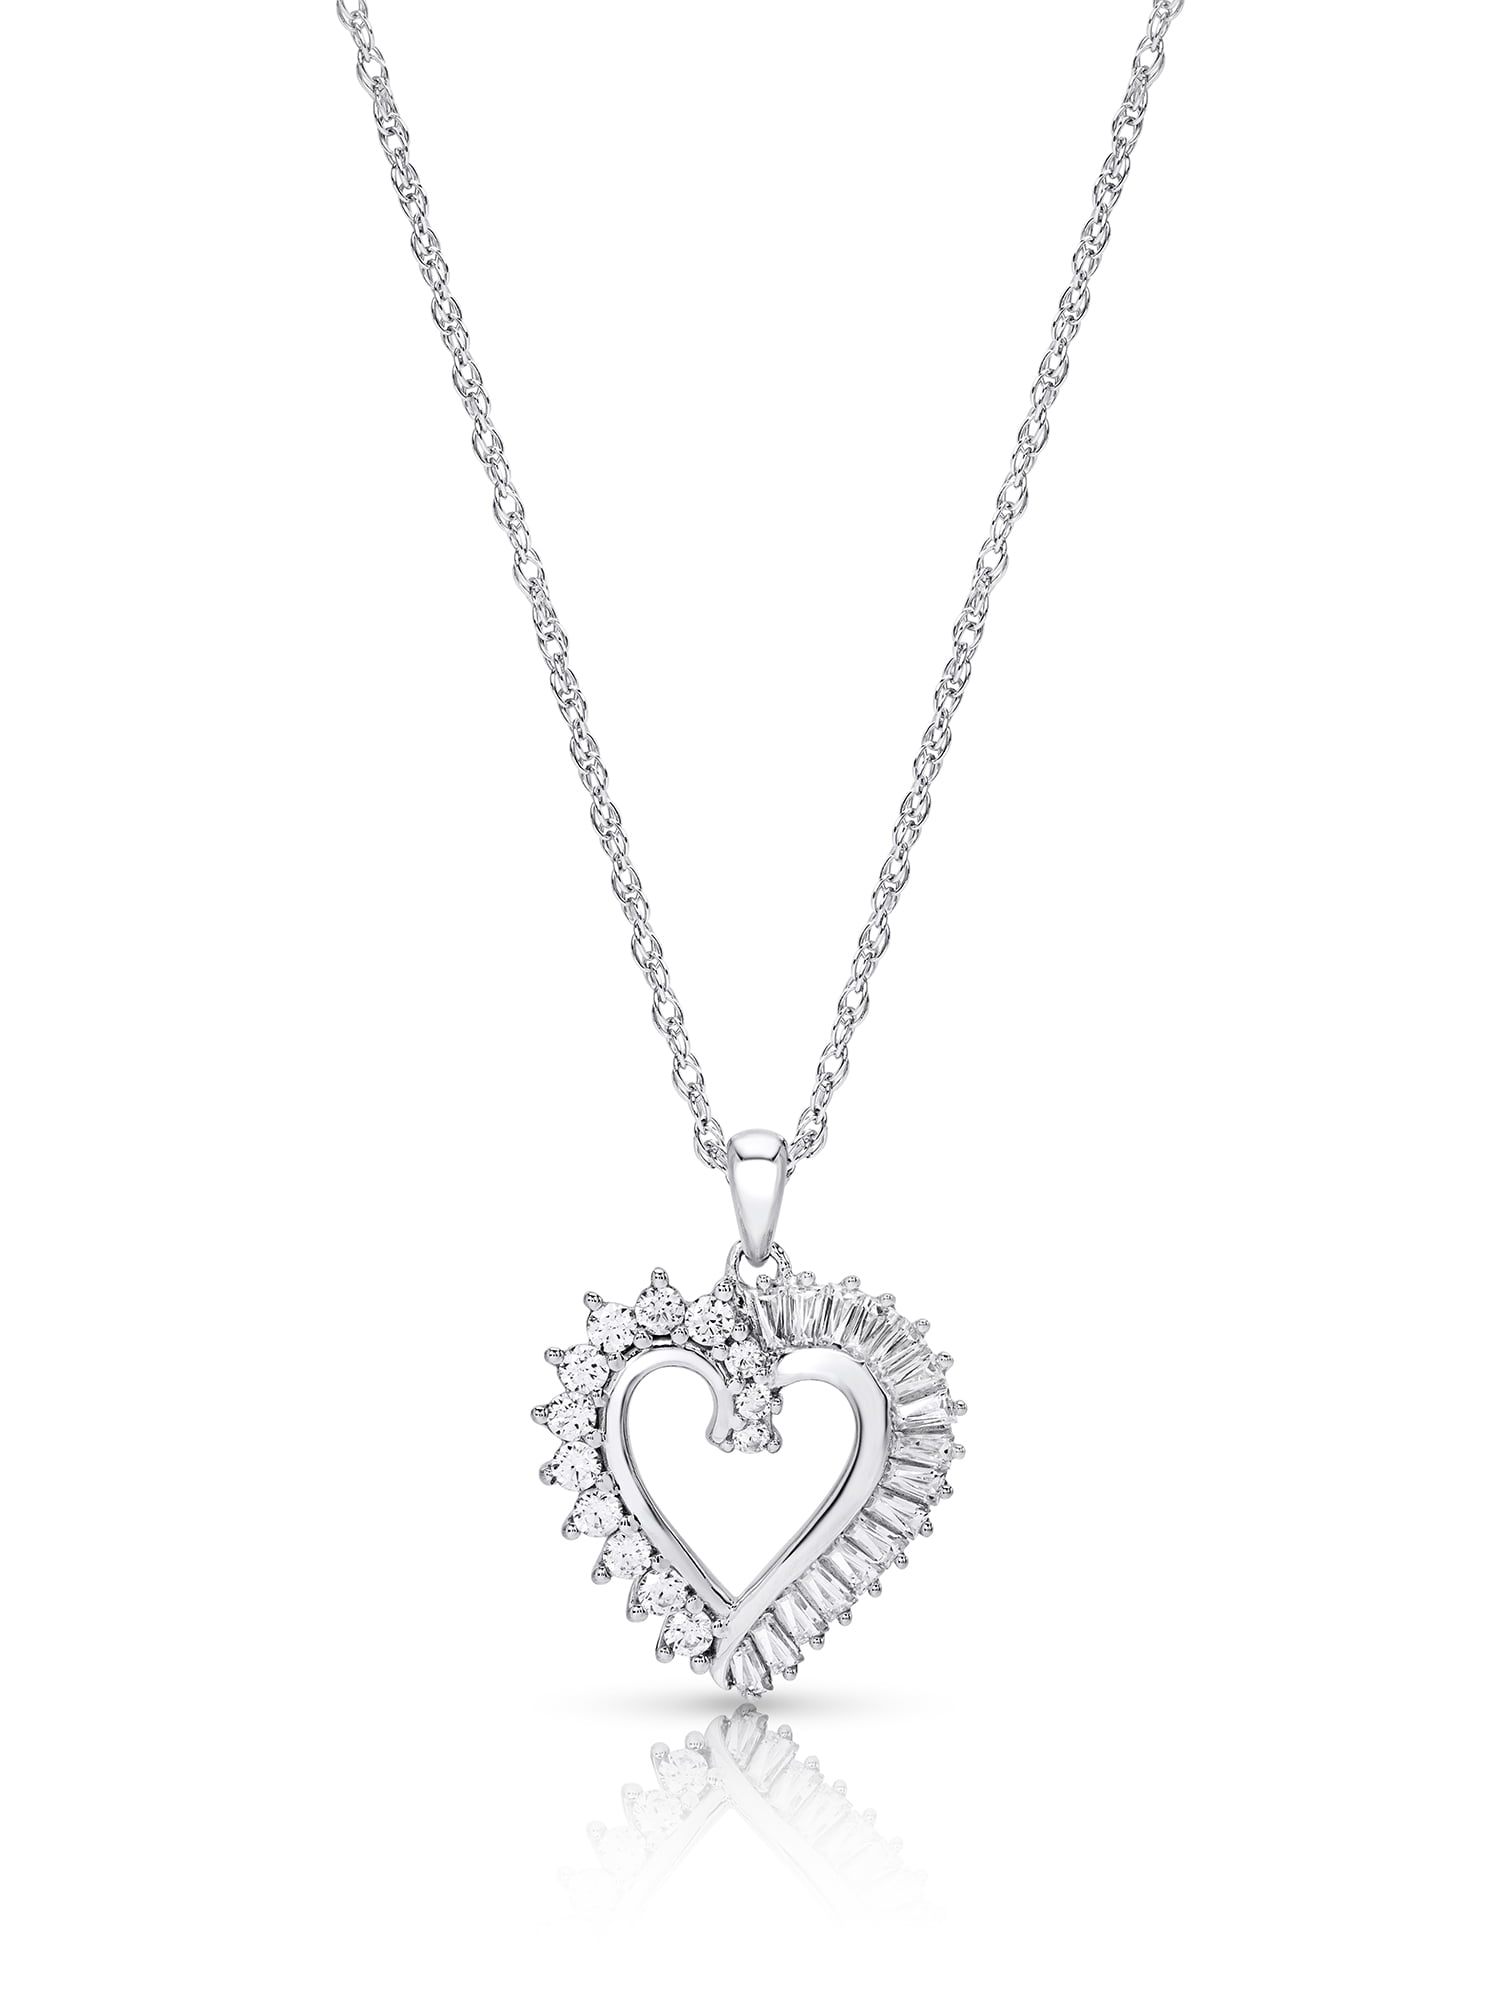 Aooaz Necklaces Silver for Women Heart Cz Necklaces Simple Silver